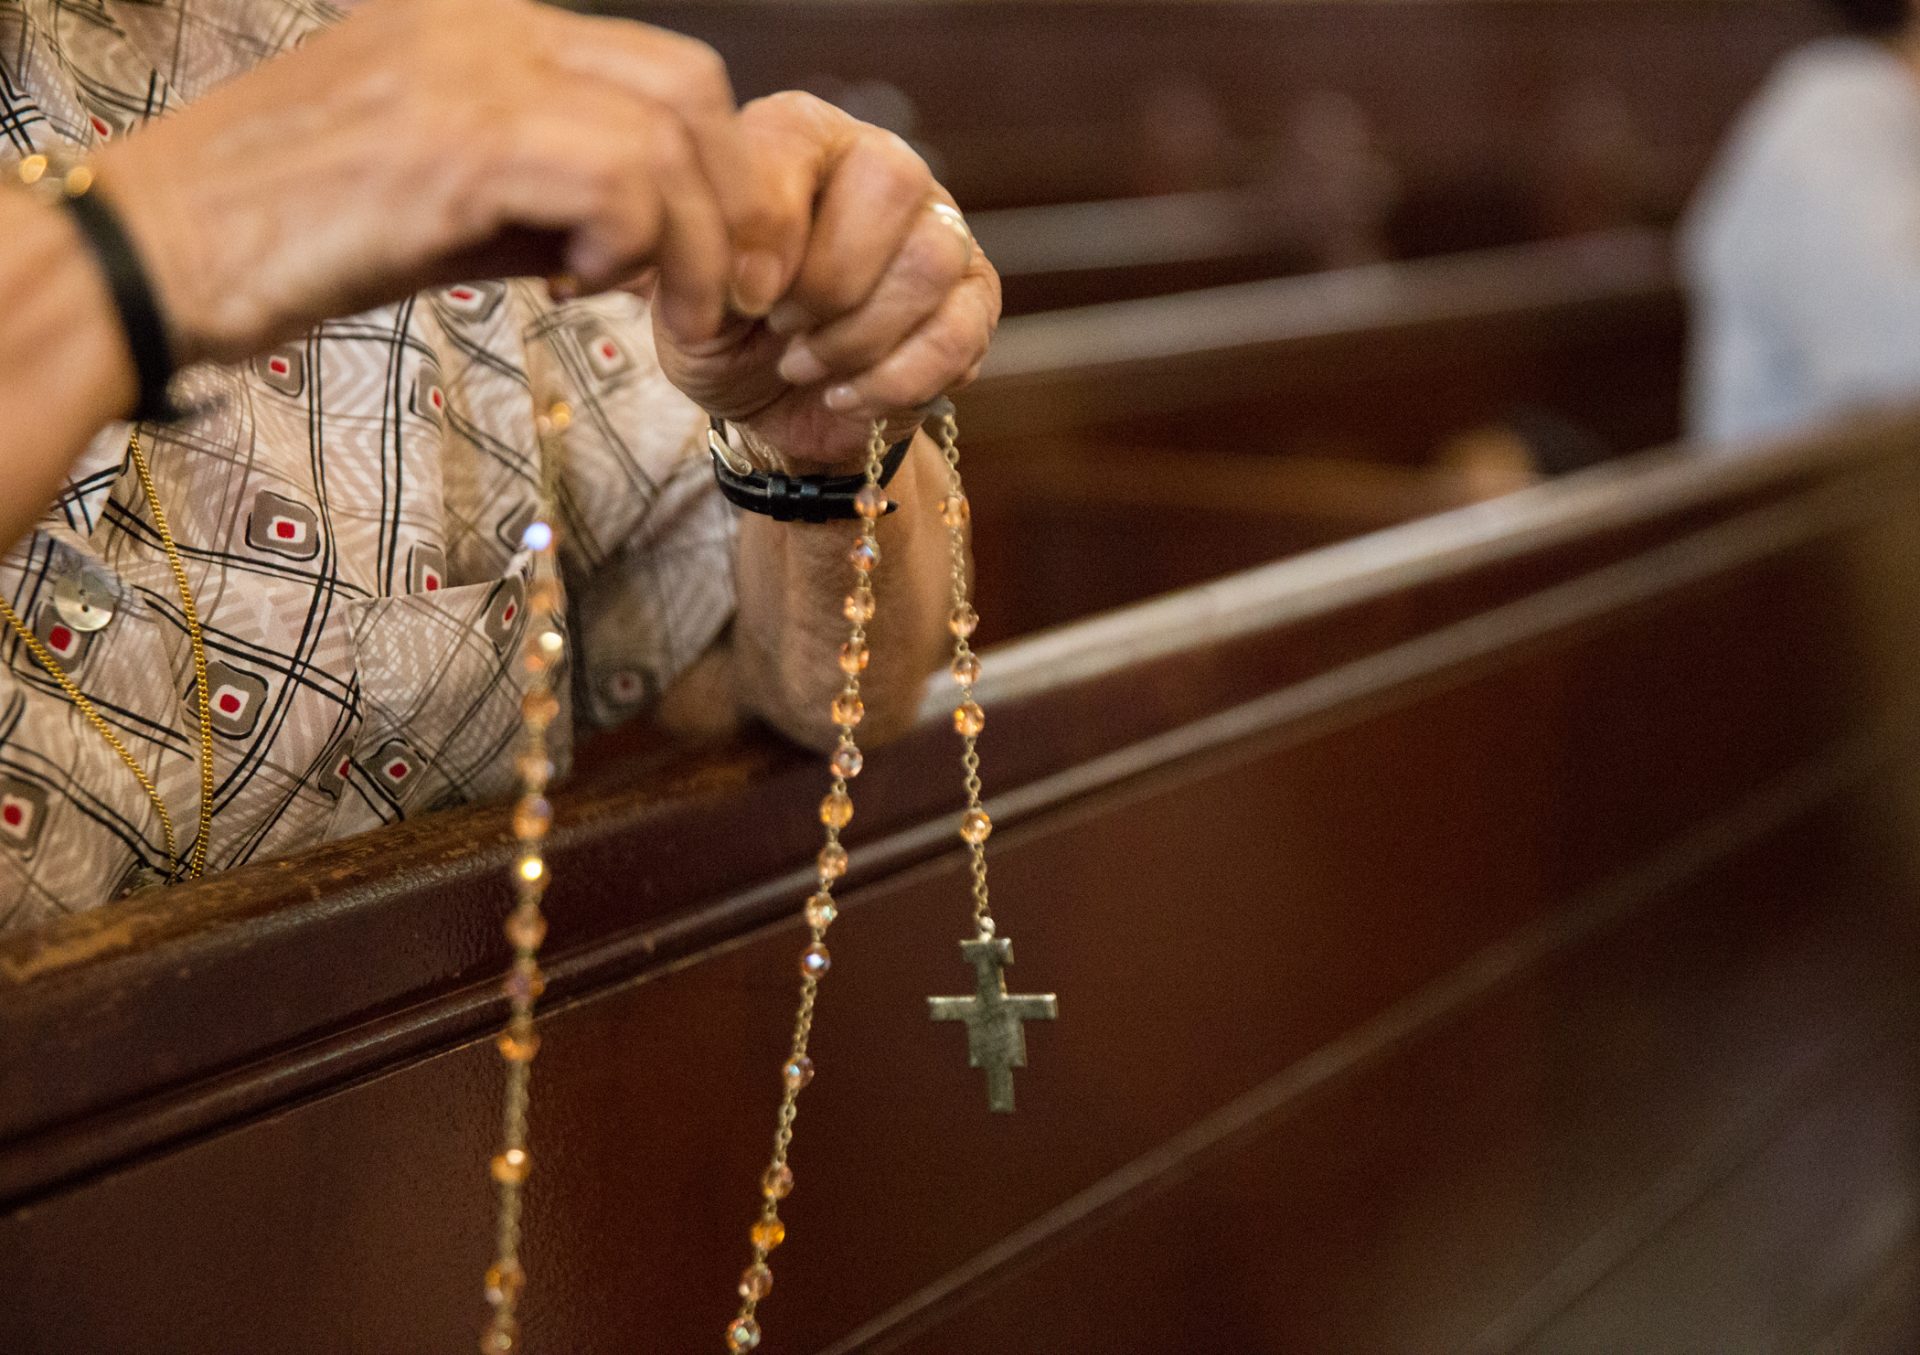 Parishioners pray the Rosary at Holy Infancy Roman Catholic Church in Bethlehem, Pennsylvania after mass on Tuesday, August 14, 2018. The same day, Pennsylvania Attorney General released his two-year grand jury investigation into widespread sexual abuse and cover-up within six Catholic dioceses across the state.